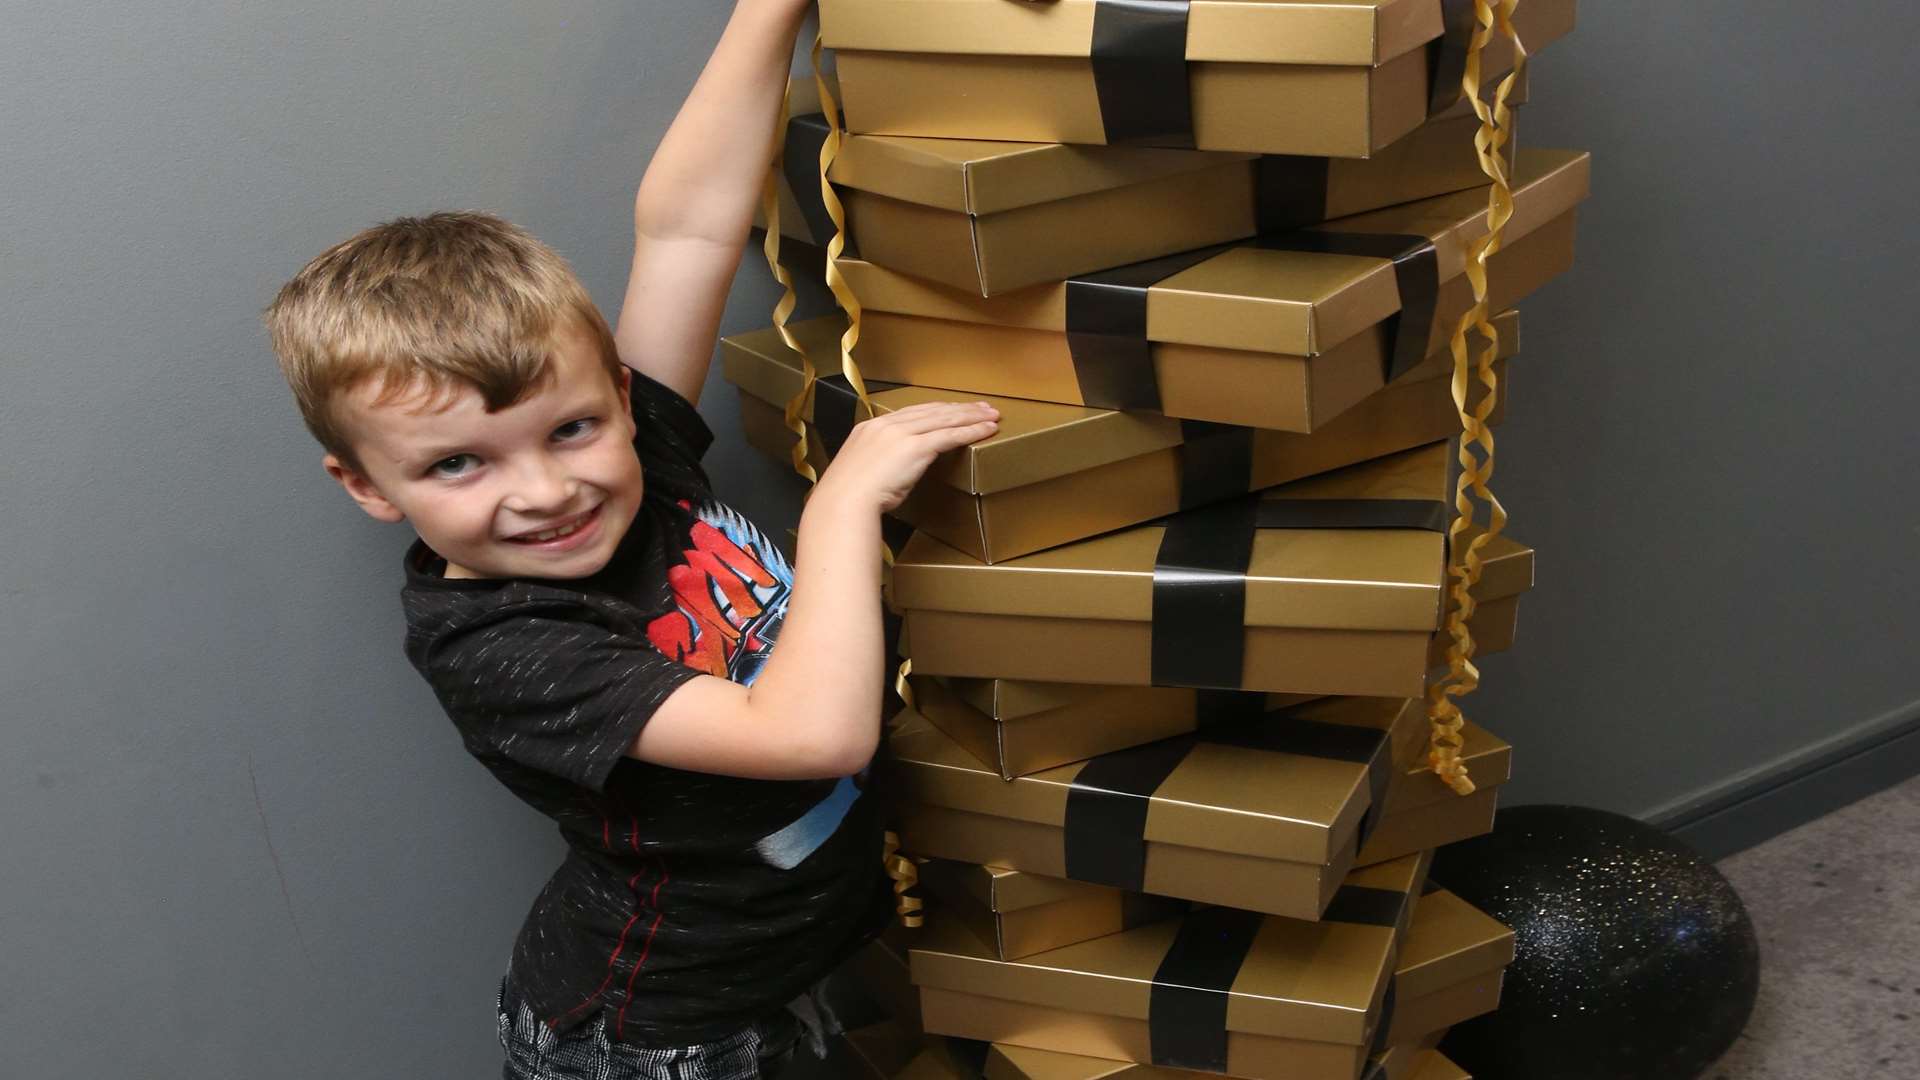 Aidan Louch, seven, checks out the decoration gift boxes at Village Hotel's Yule Fest